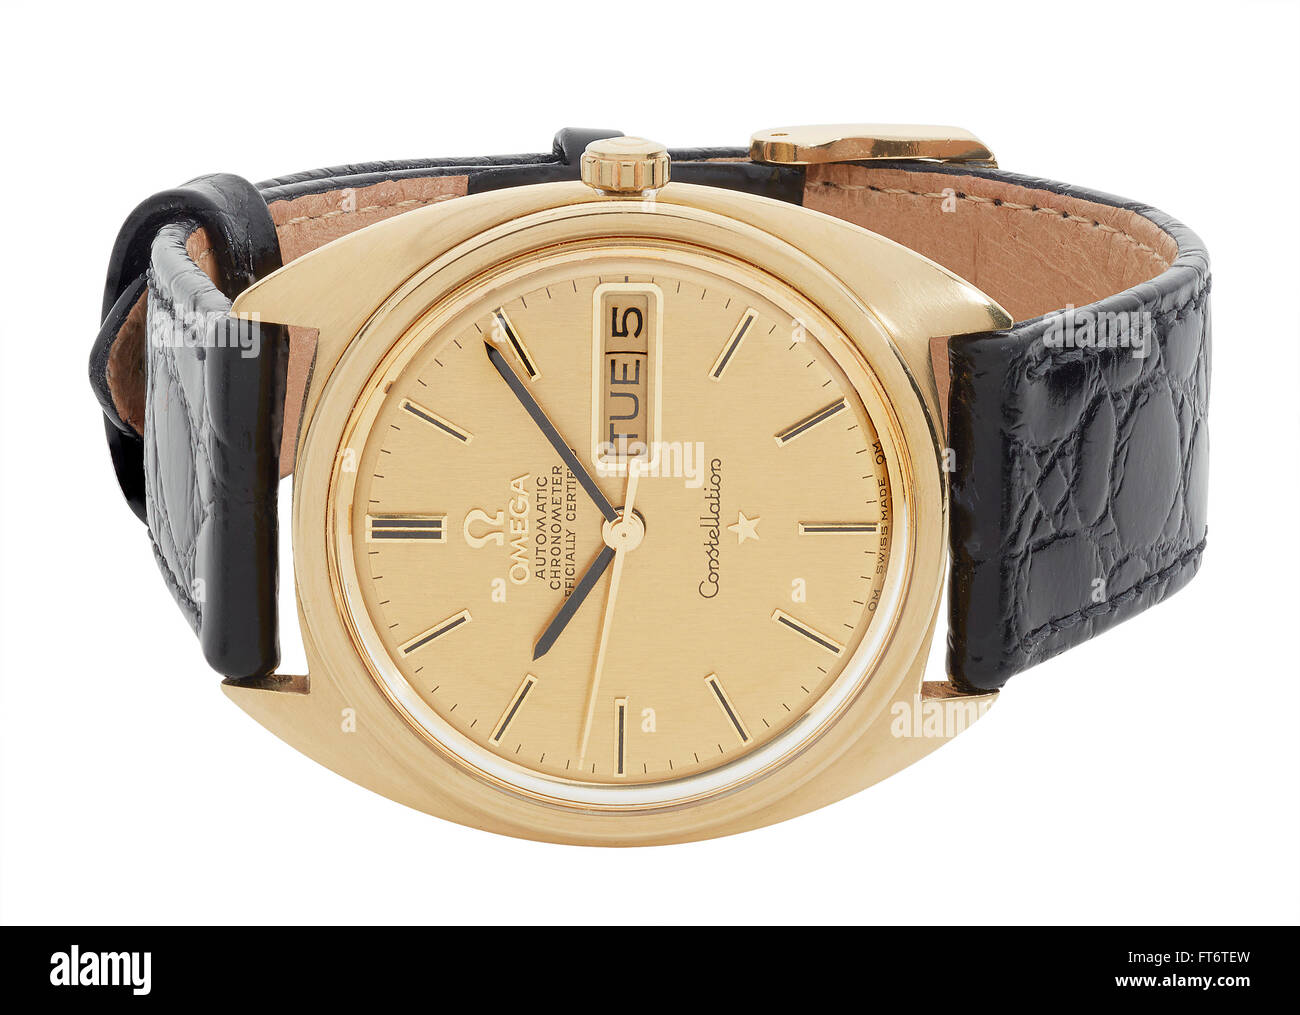 Omega Constellation gold watch from the 